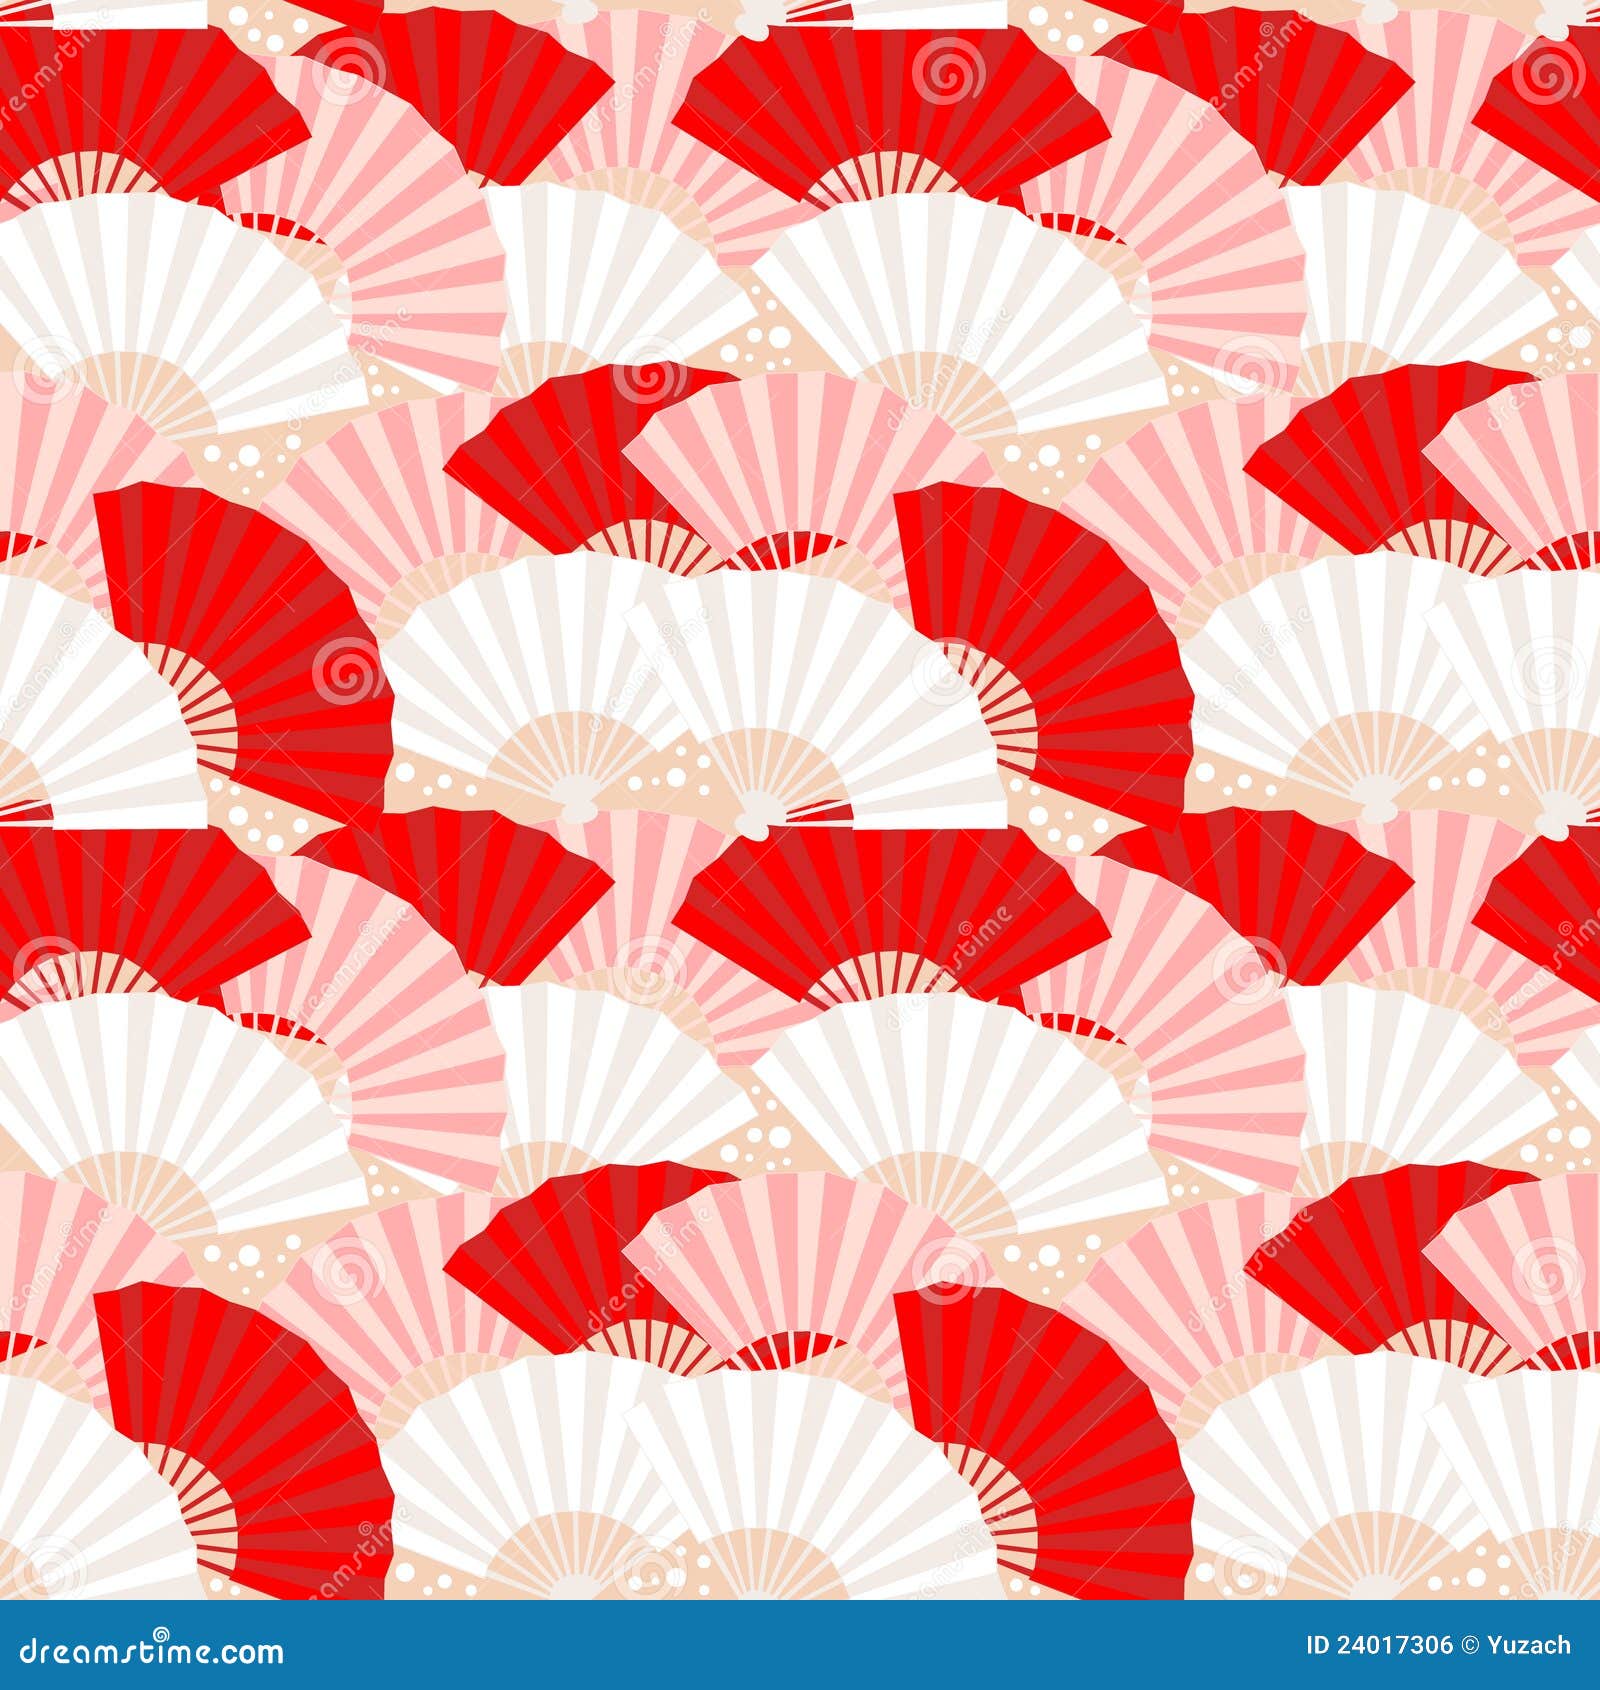 Download Colorful Japanese Fan Seamless Pattern Stock Vector ...